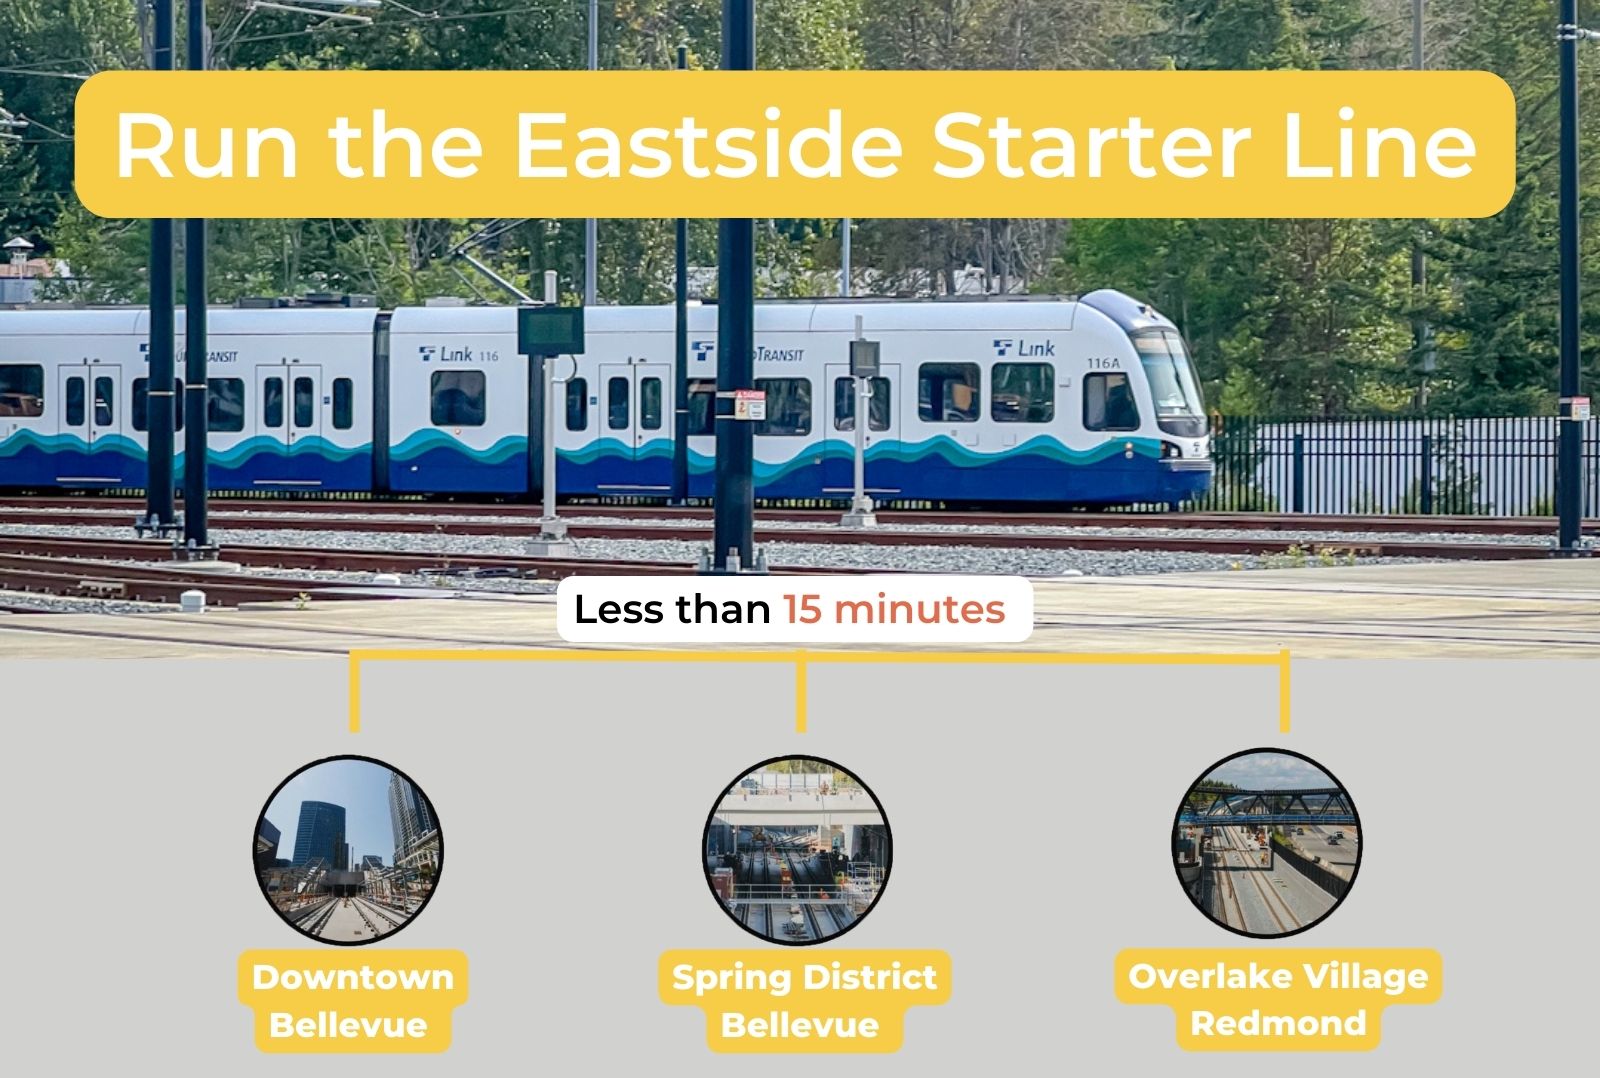 Run the Eastside Starter Line - Downtown Bellevue to Overlake Village Redmond trip will be less than 15 minutes